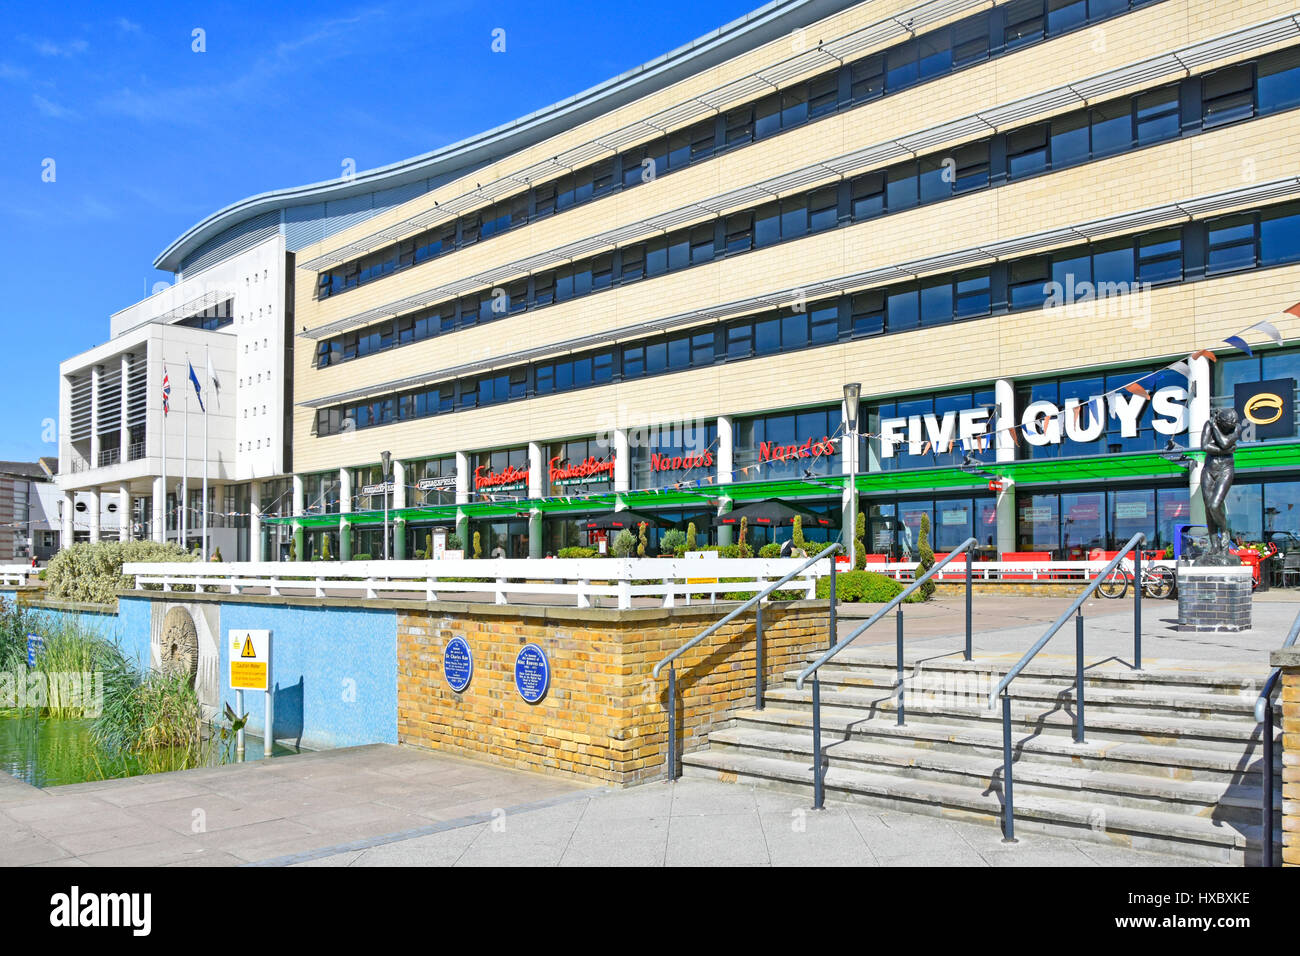 Five Guys Nandos & Pizza Express restaurants fast food business with outdoor eating space at Harlow New Town Civic Centre building Essex England UK Stock Photo